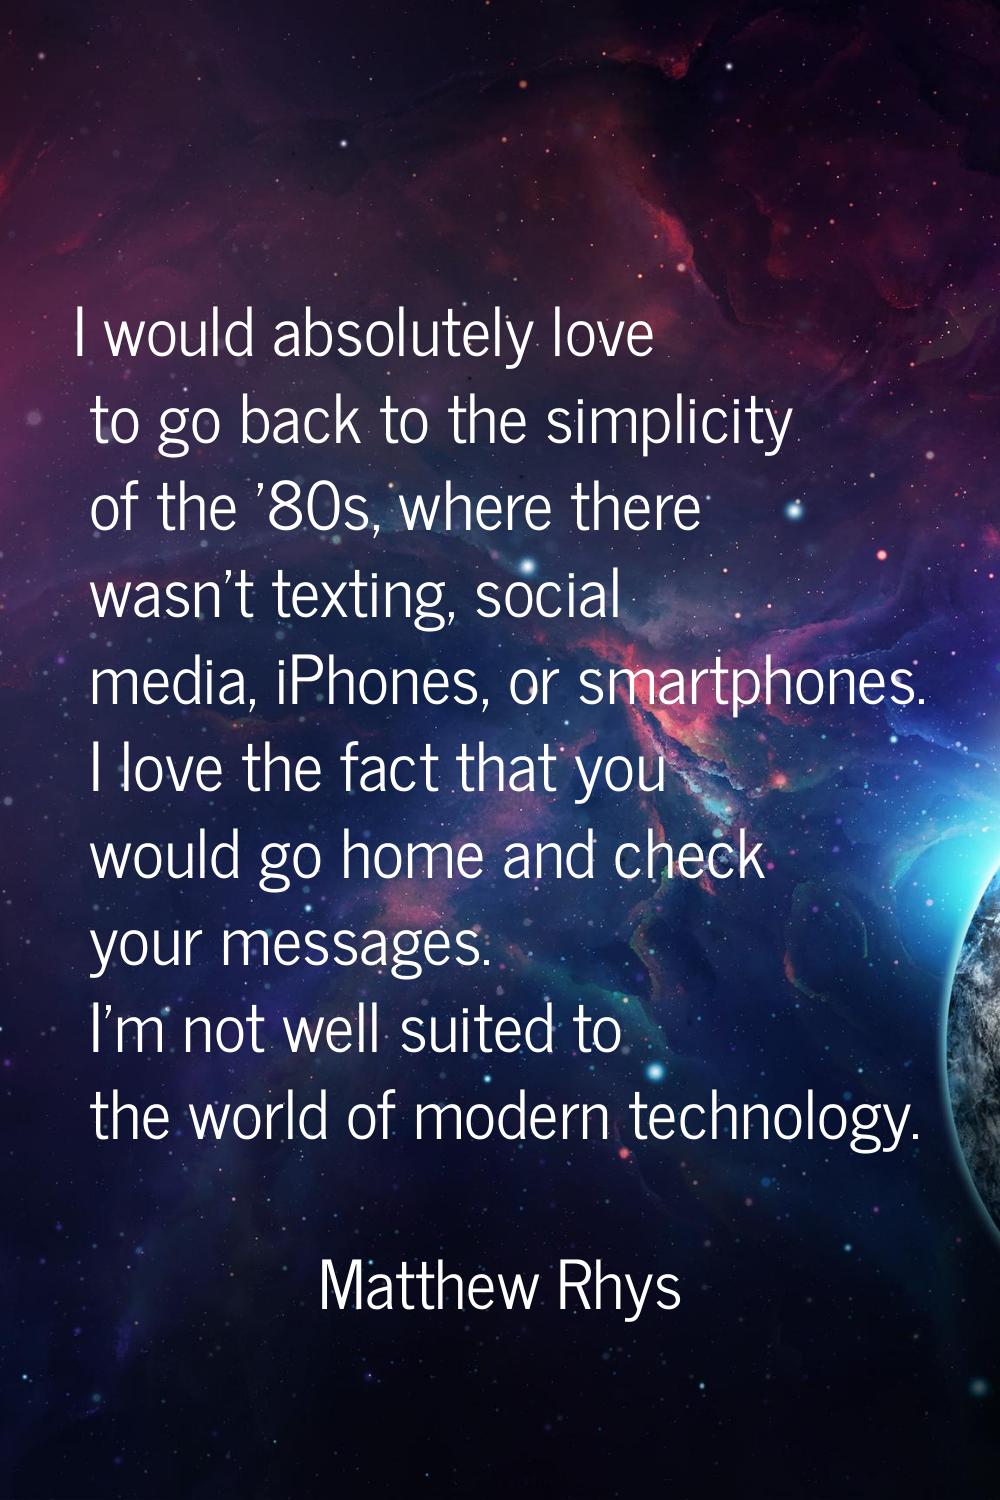 I would absolutely love to go back to the simplicity of the '80s, where there wasn't texting, socia